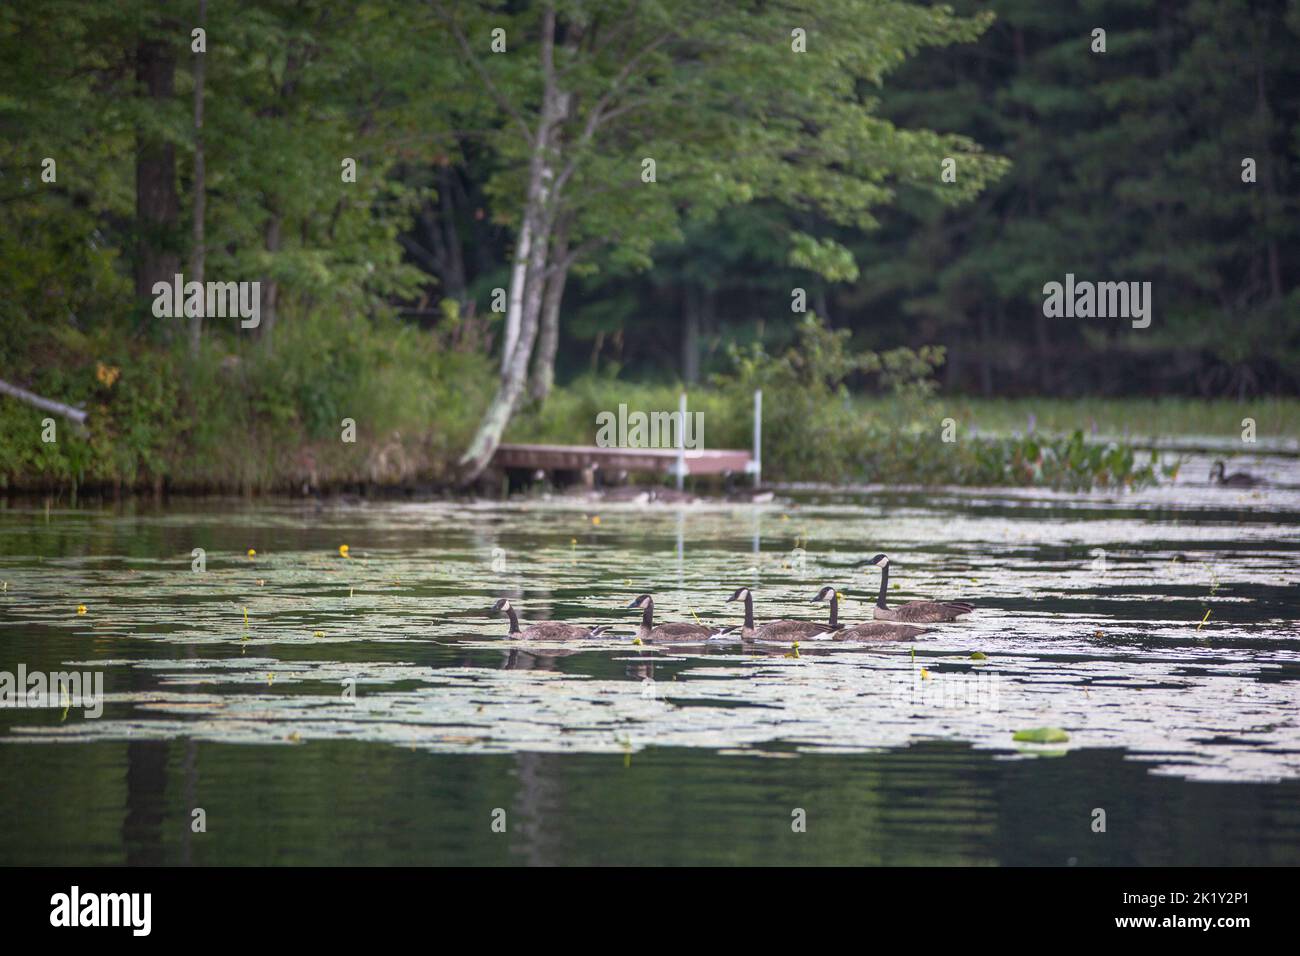 A flock of Canada geese, Branta canadensis captured swimming on a lake surrounded by vegetation Stock Photo